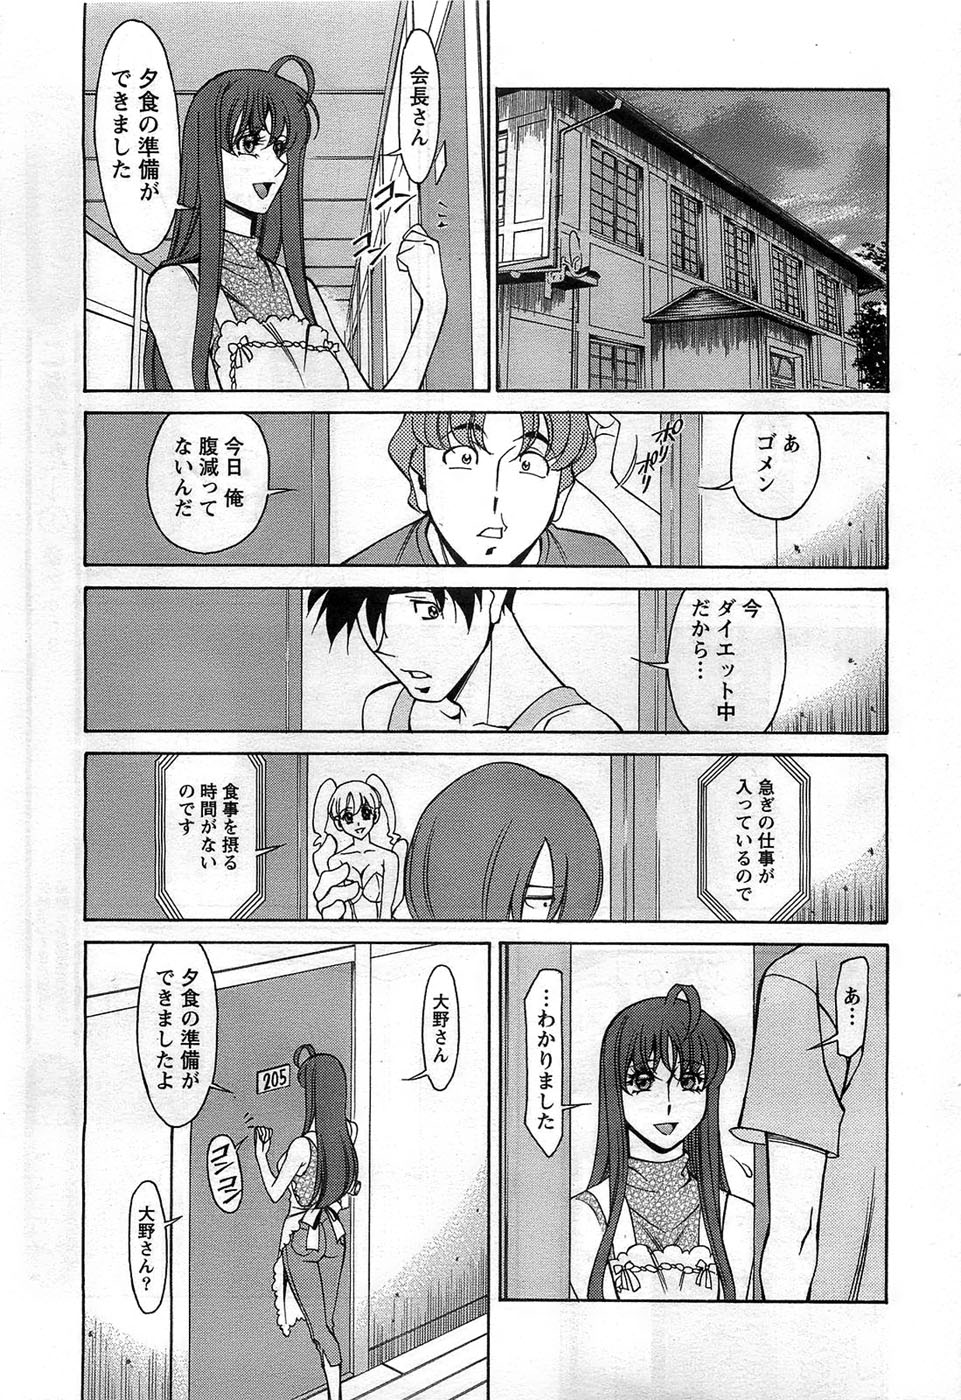 Action Pizazz DX 2008-11 page 31 full